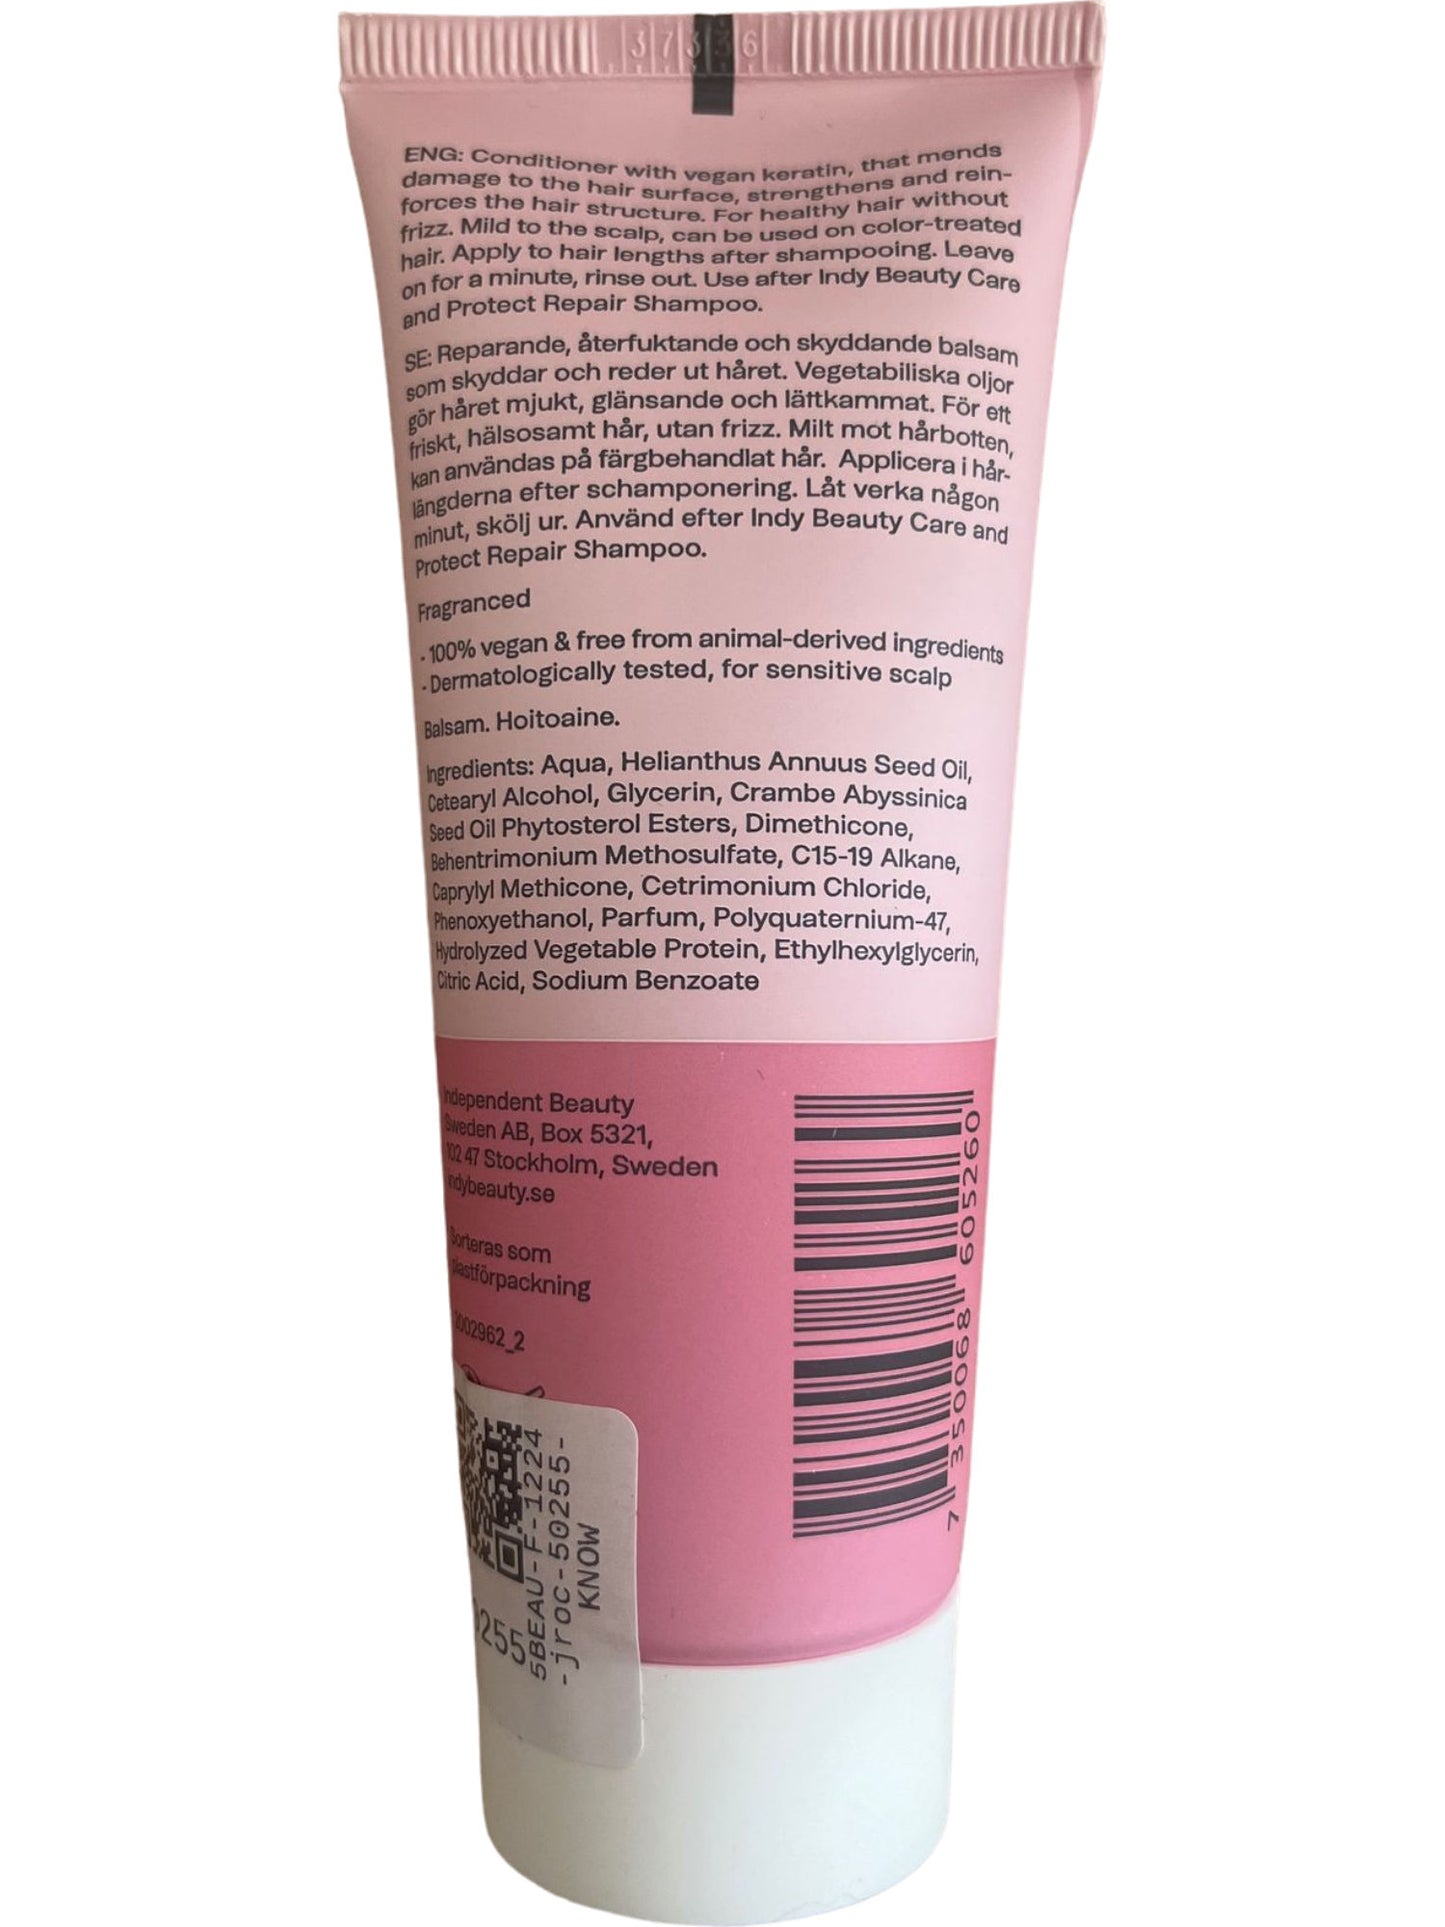 Indy Beauty Pink Repair Conditioner for Dry/Damaged/Colored Hair